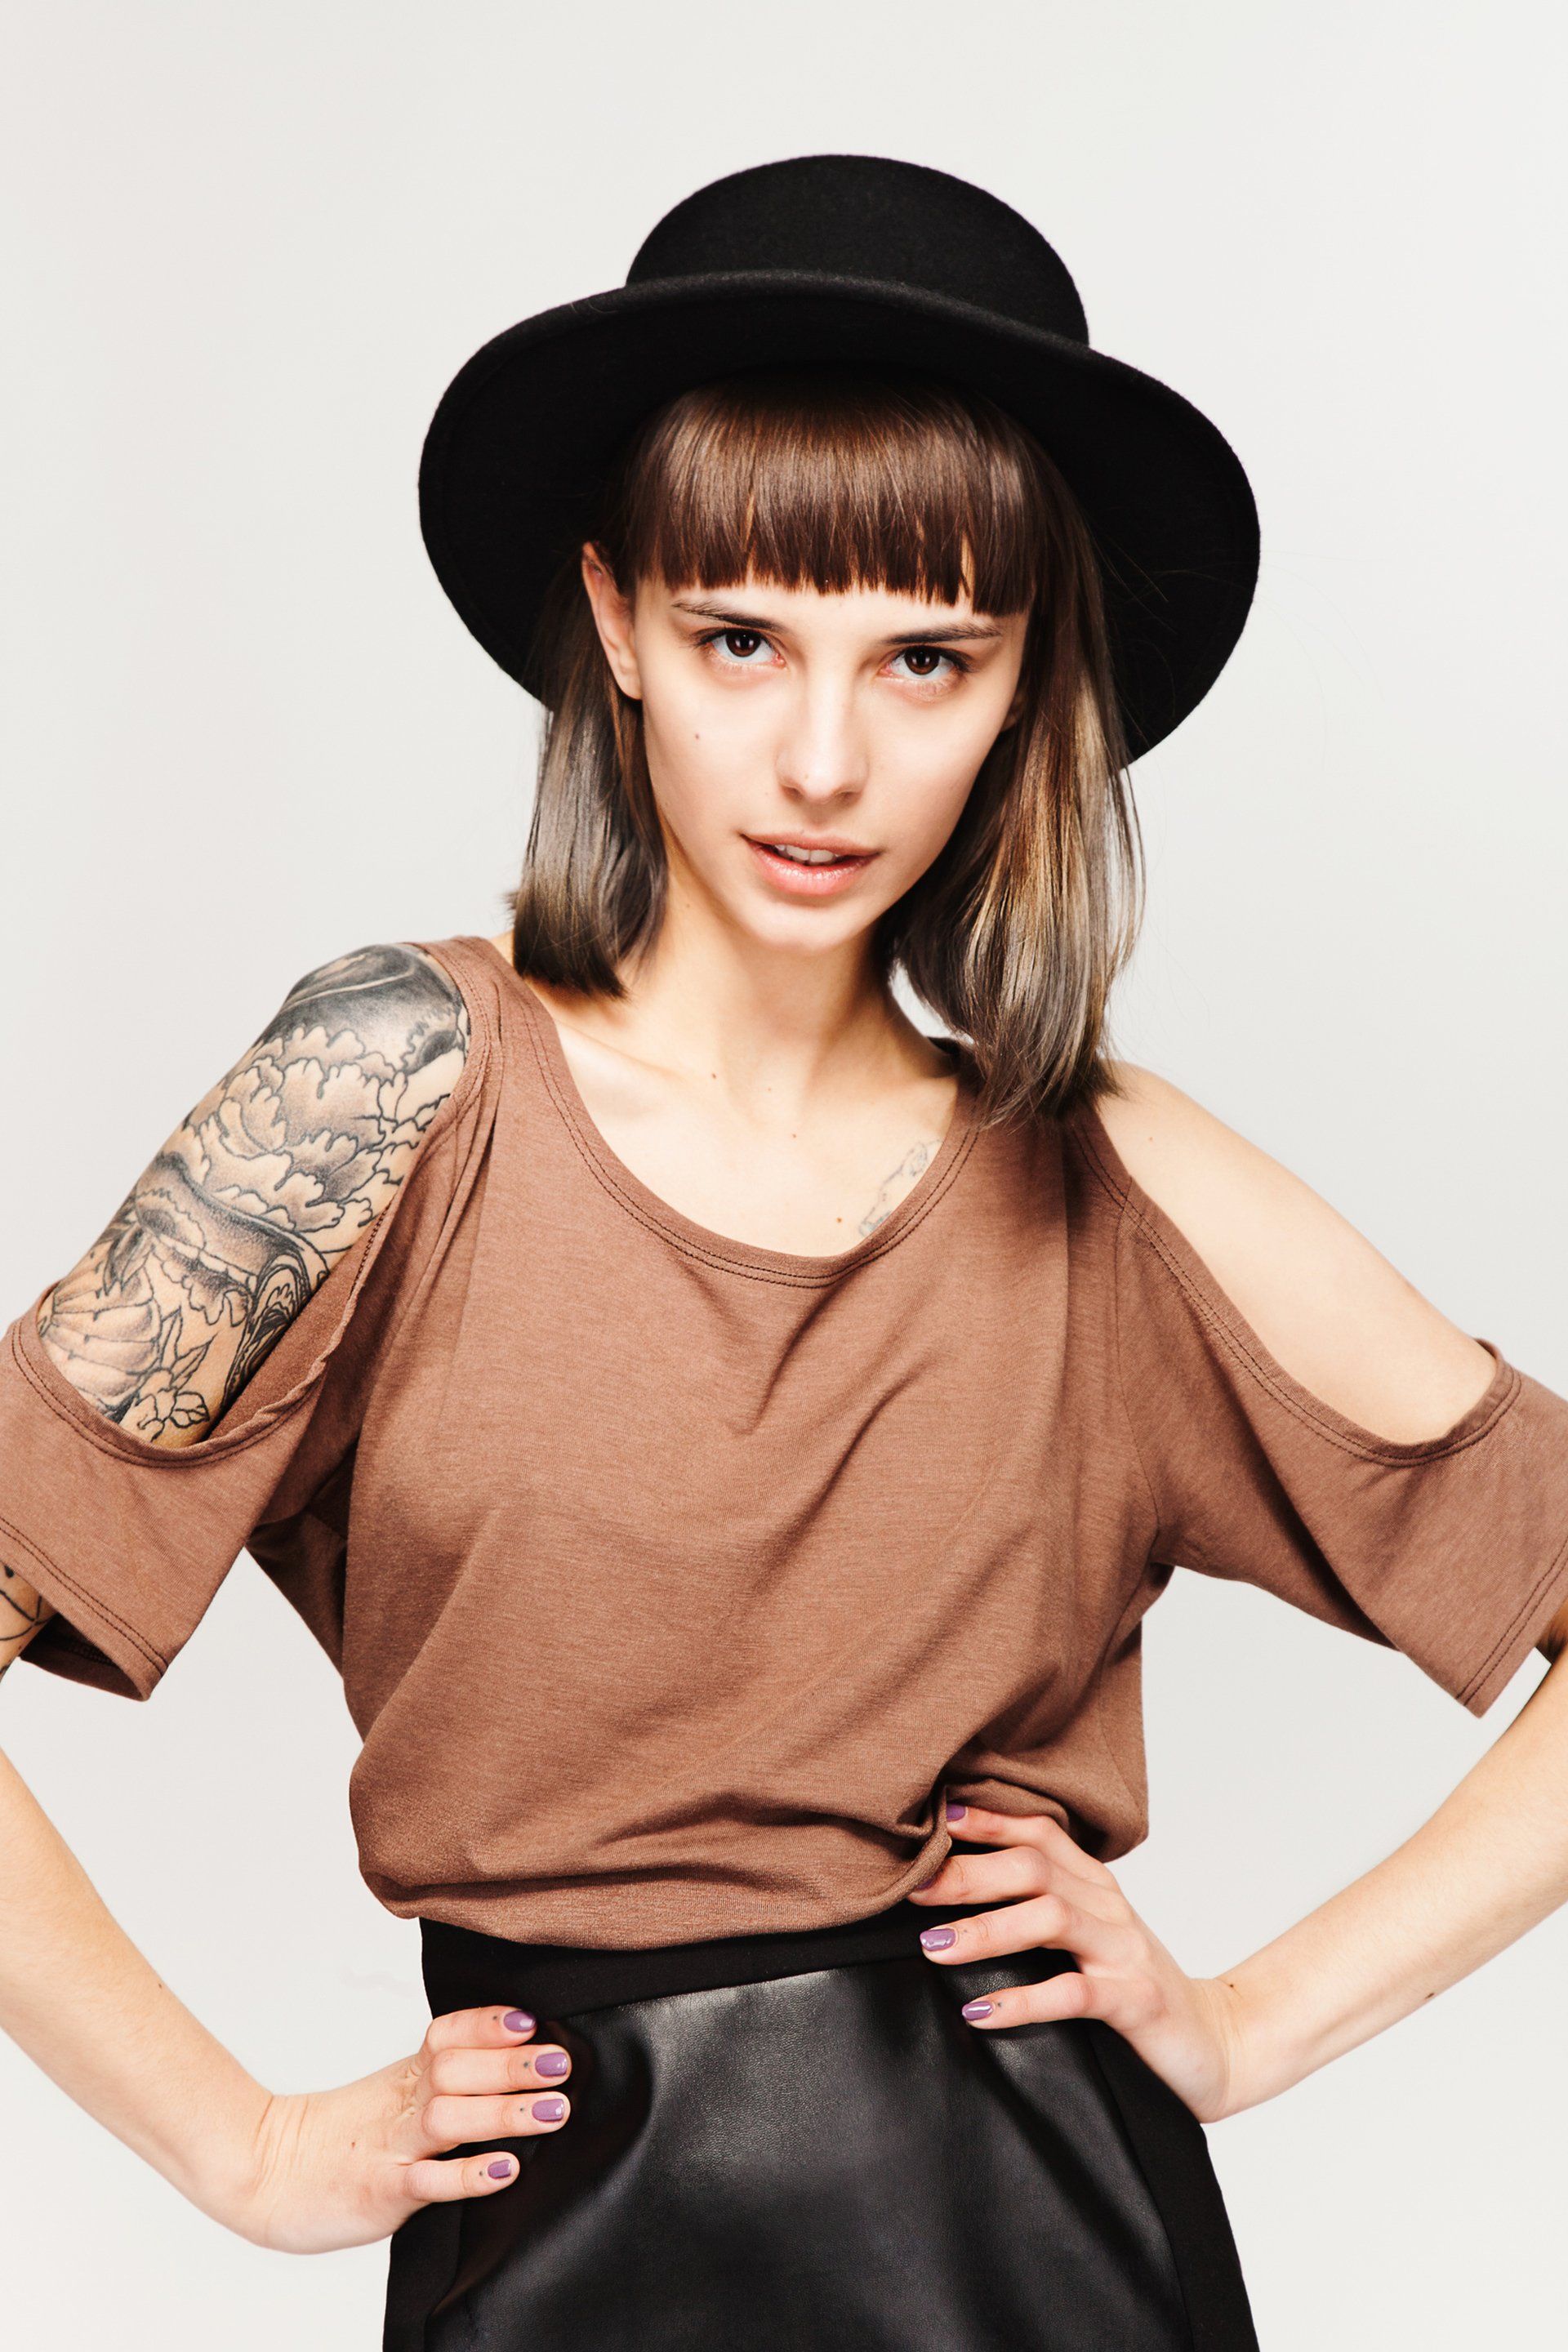 A woman wearing a hat and a brown shirt has a tattoo on her arm